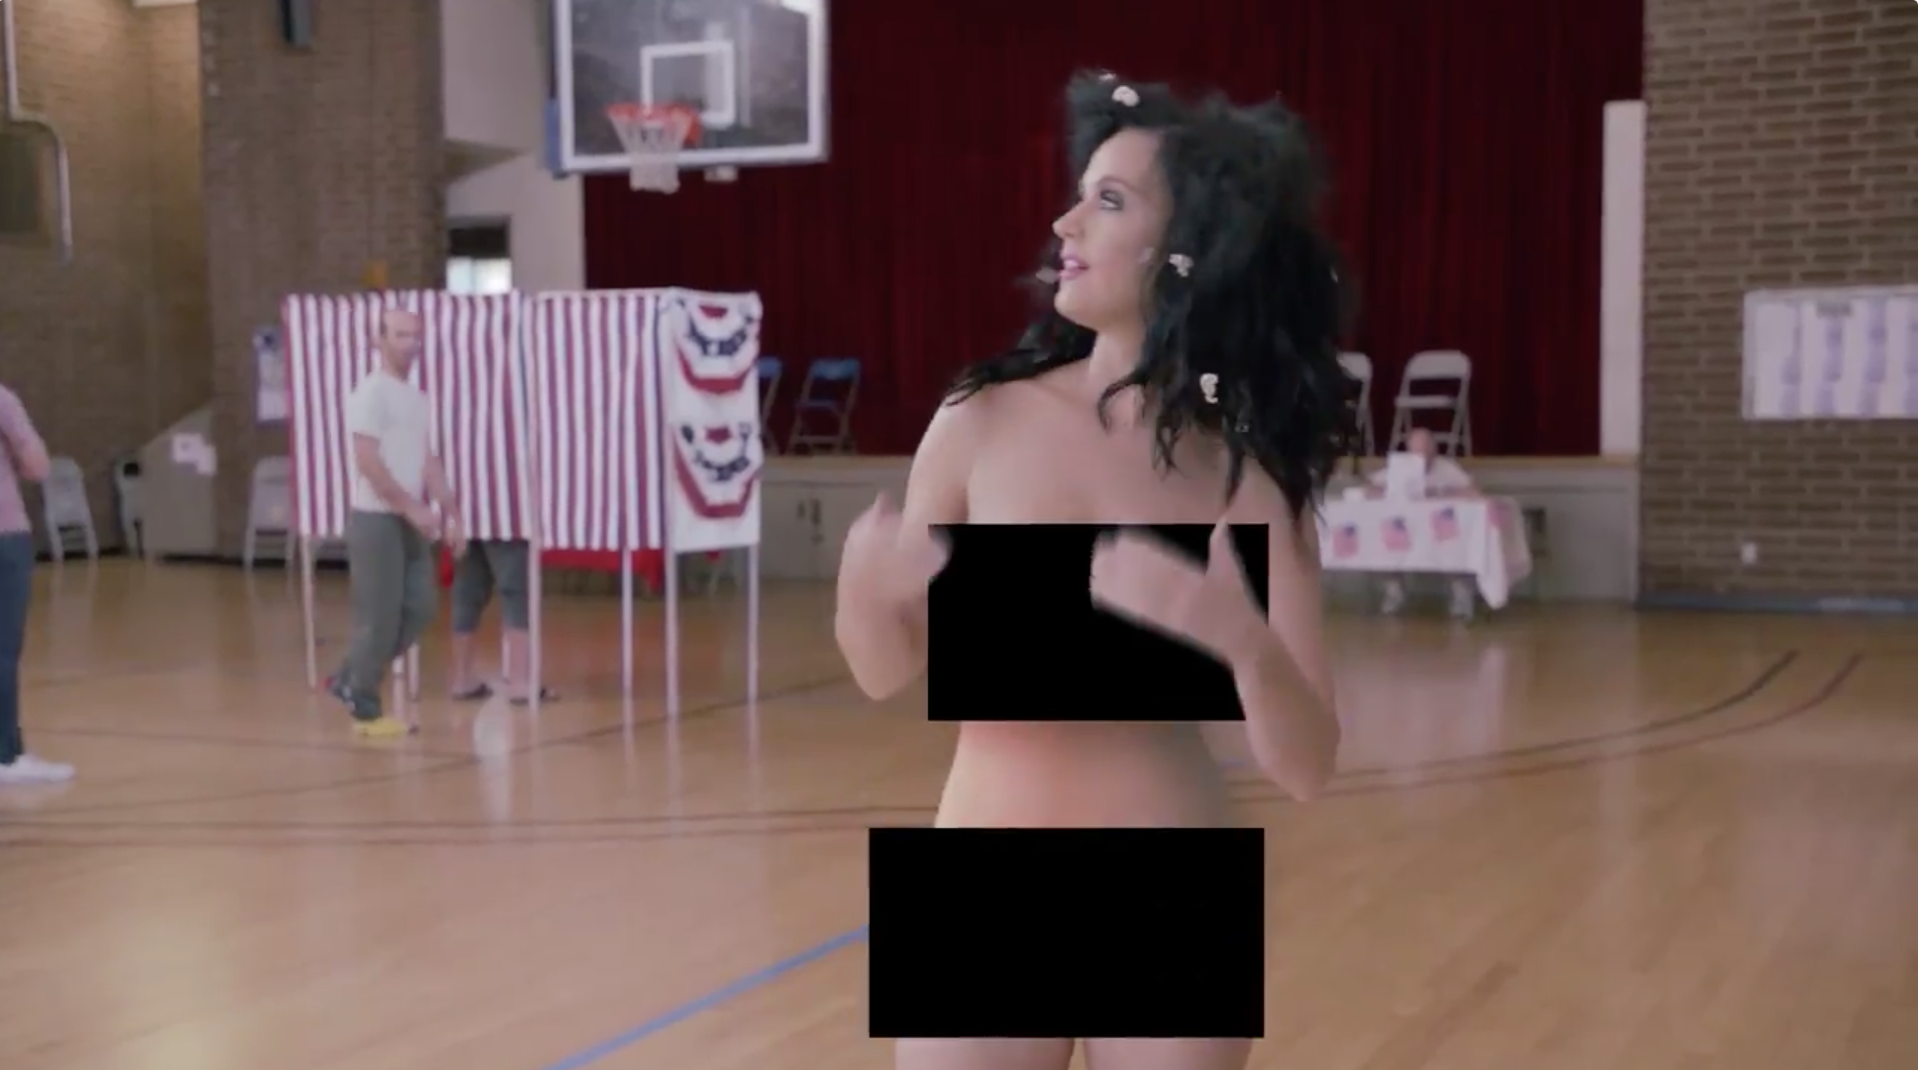 chris chan add katy perry vote naked uncensored photo